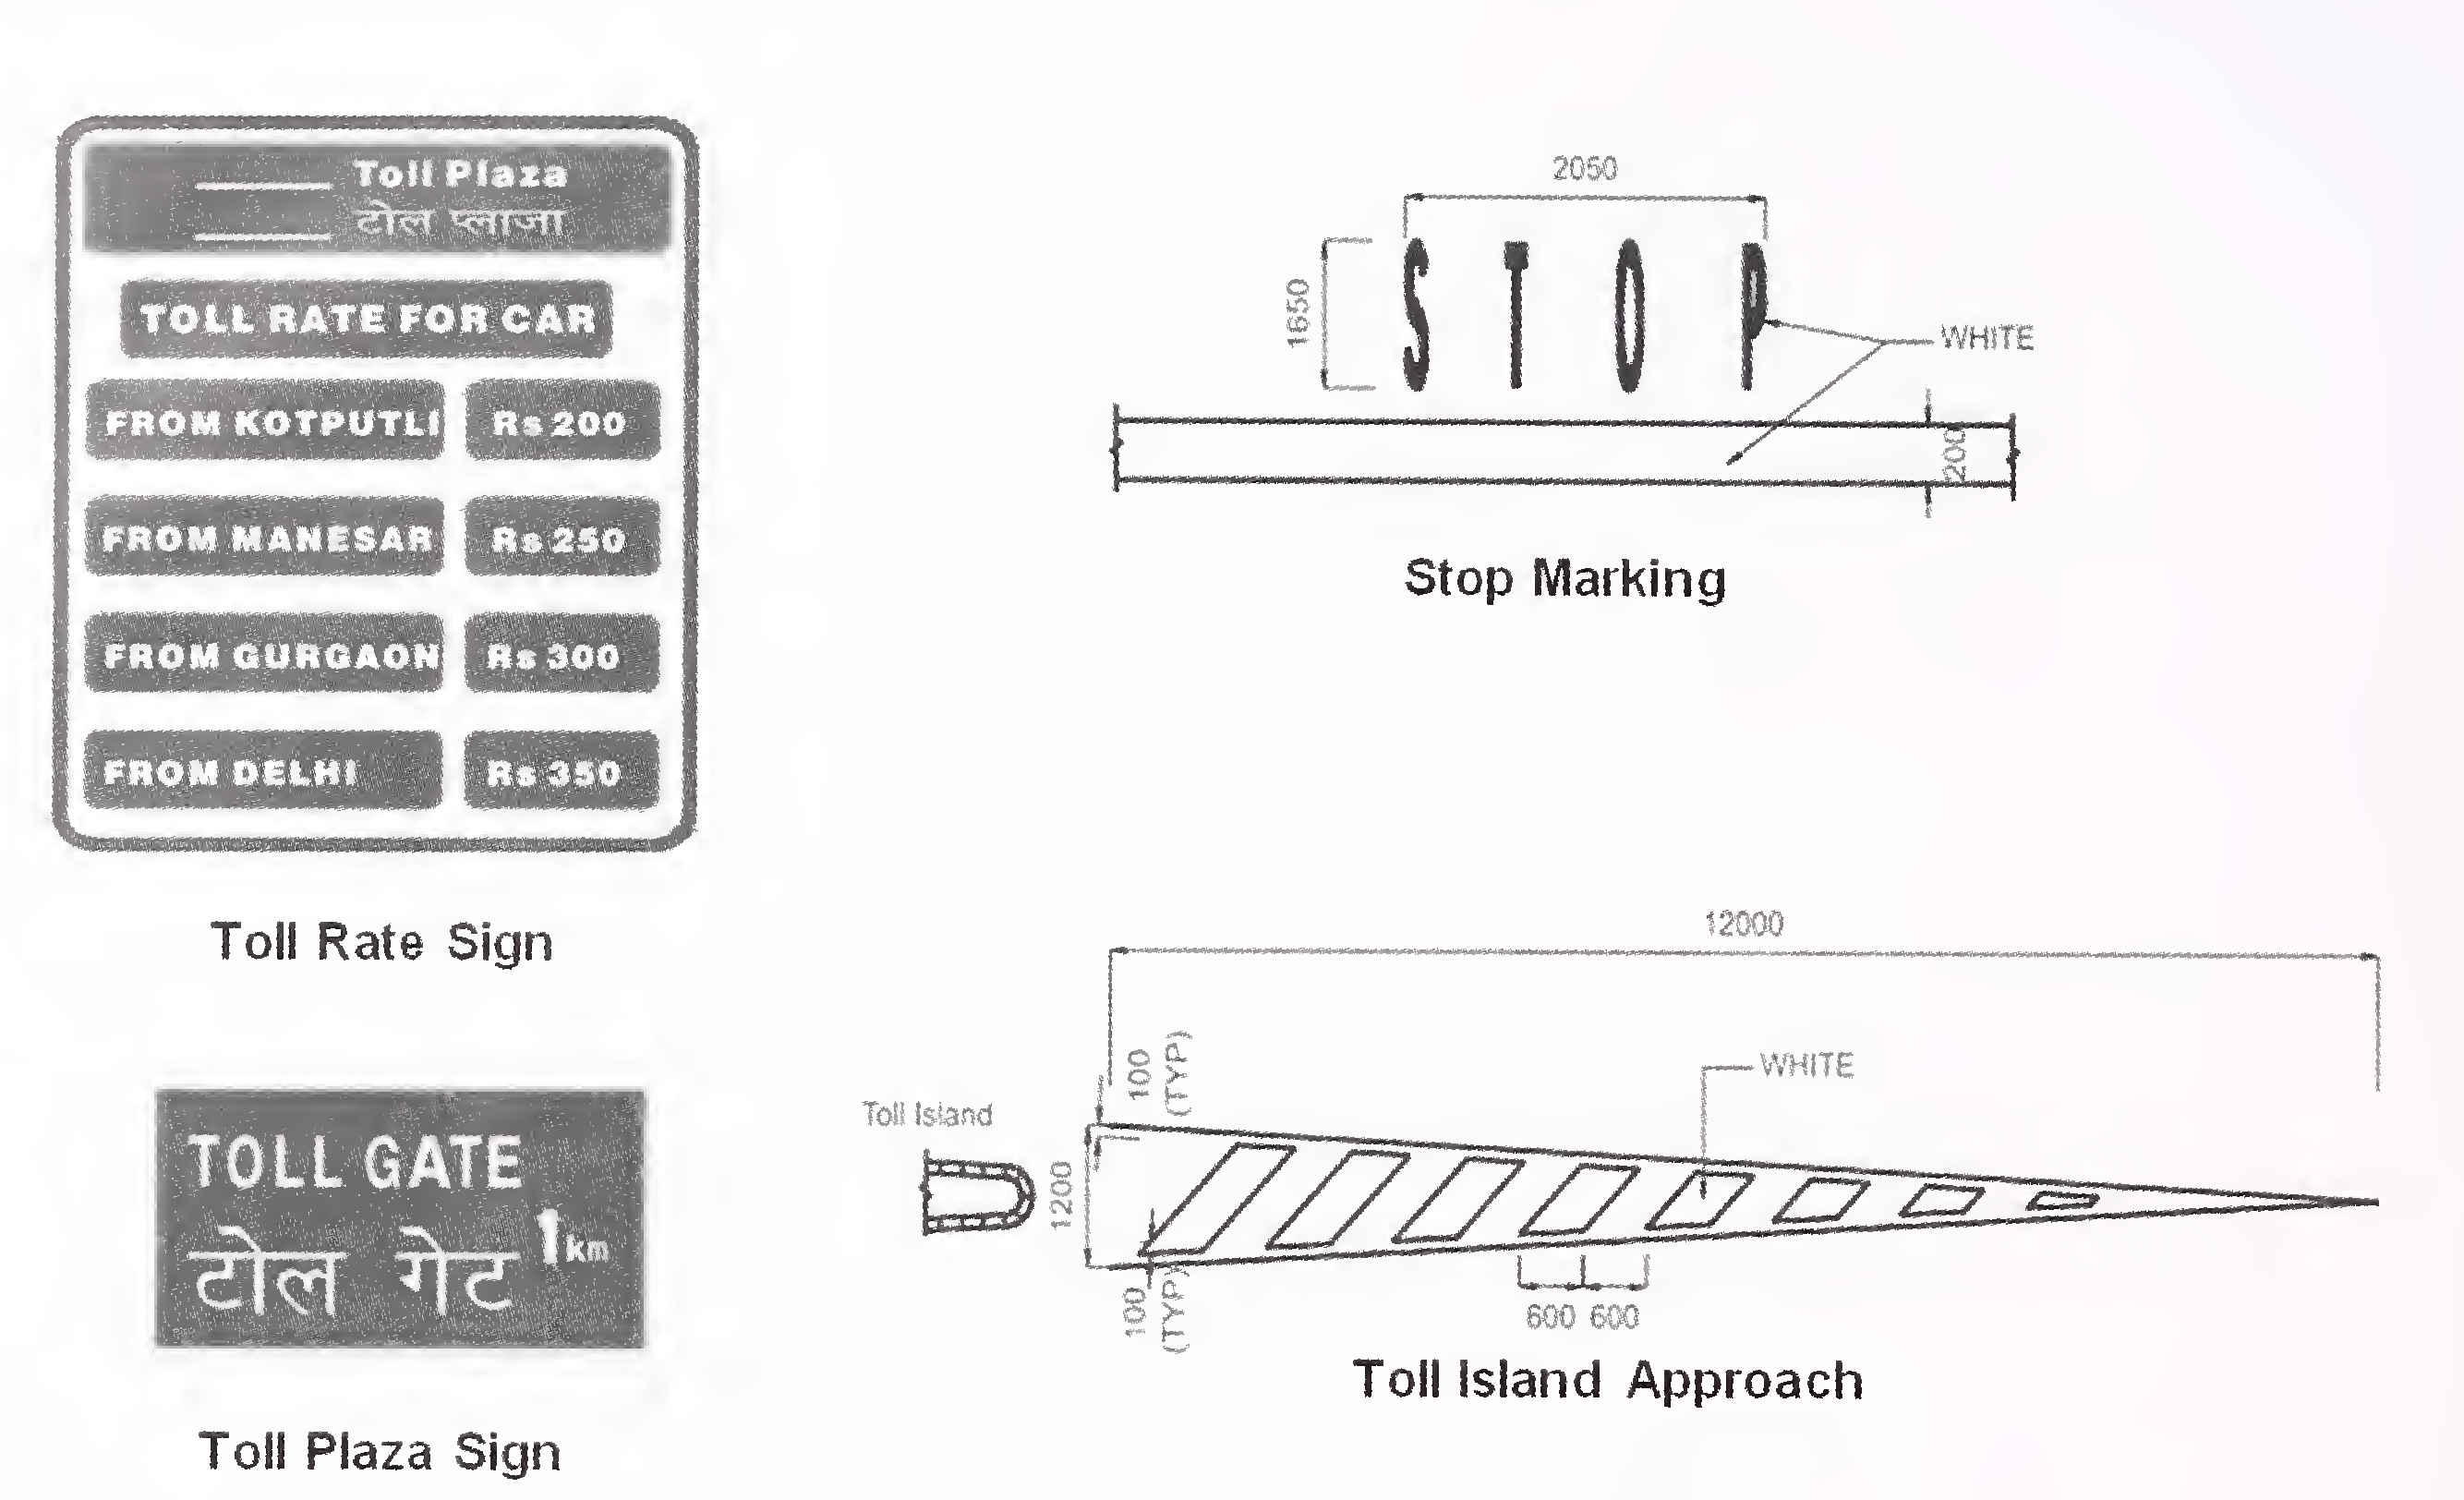 Fig. 12.6 Traffic Signs and Road Markings in Toll Plaza